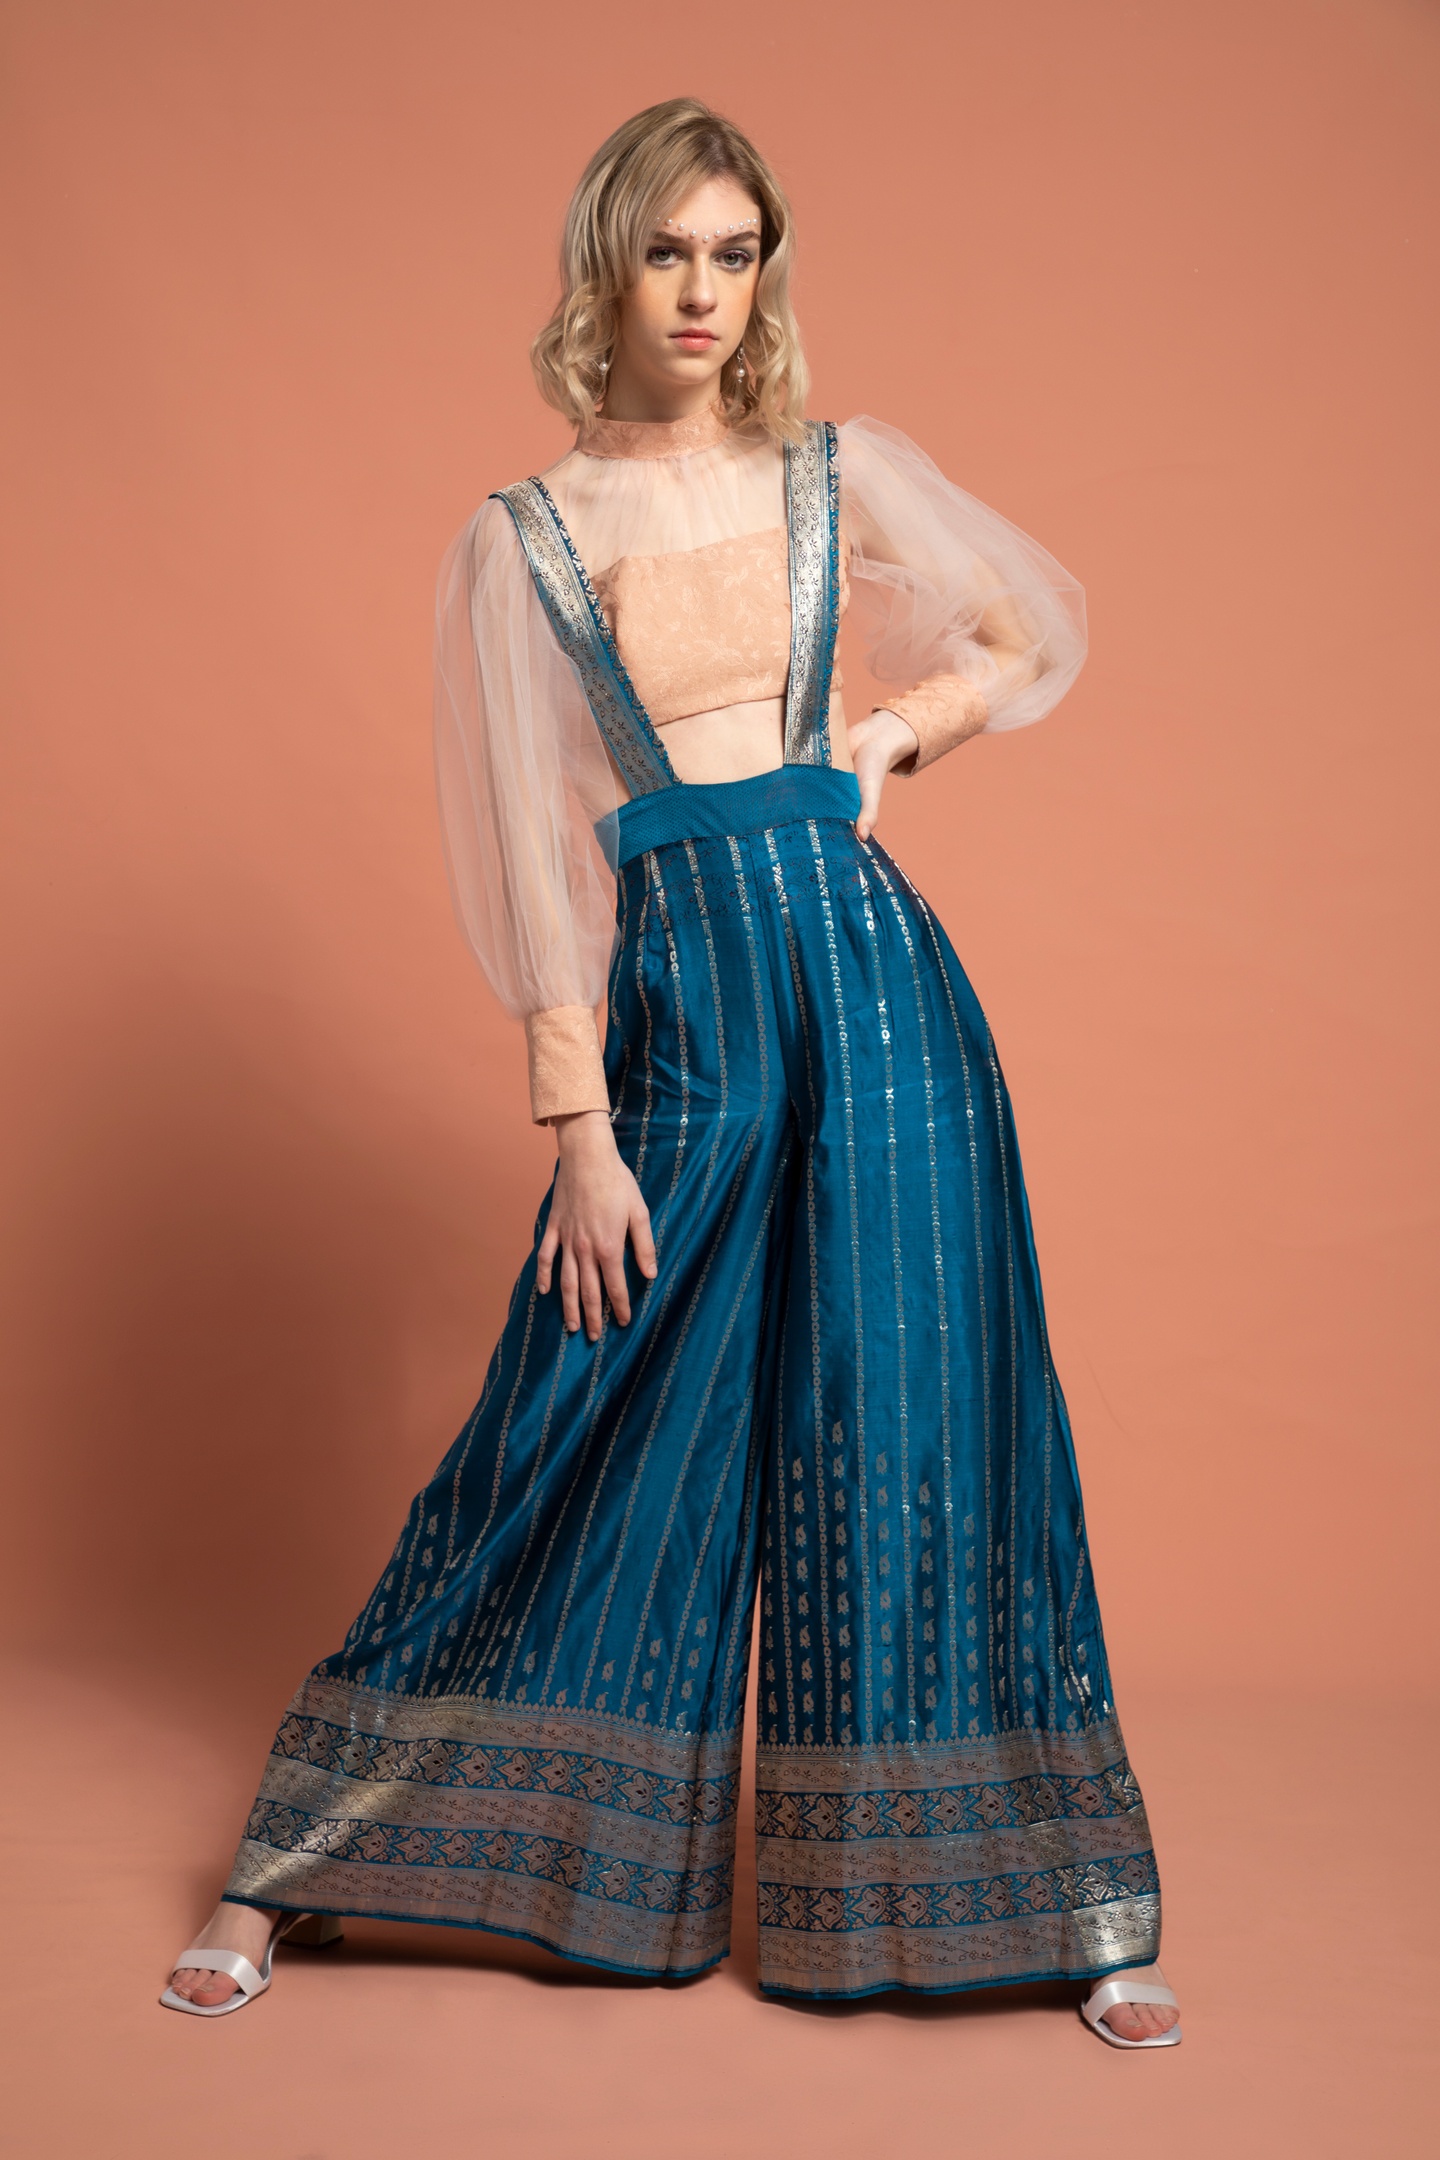 Model wears high-waisted overalls with extremely wide legs made of blue silk with a golden vertical stripe imprint and a wide border design at the cuffs. The top is a long sleeve crop top with peach fabric across the bust and at the collar and cuffs, connected by gauzy fabric over the chest and sleeves.